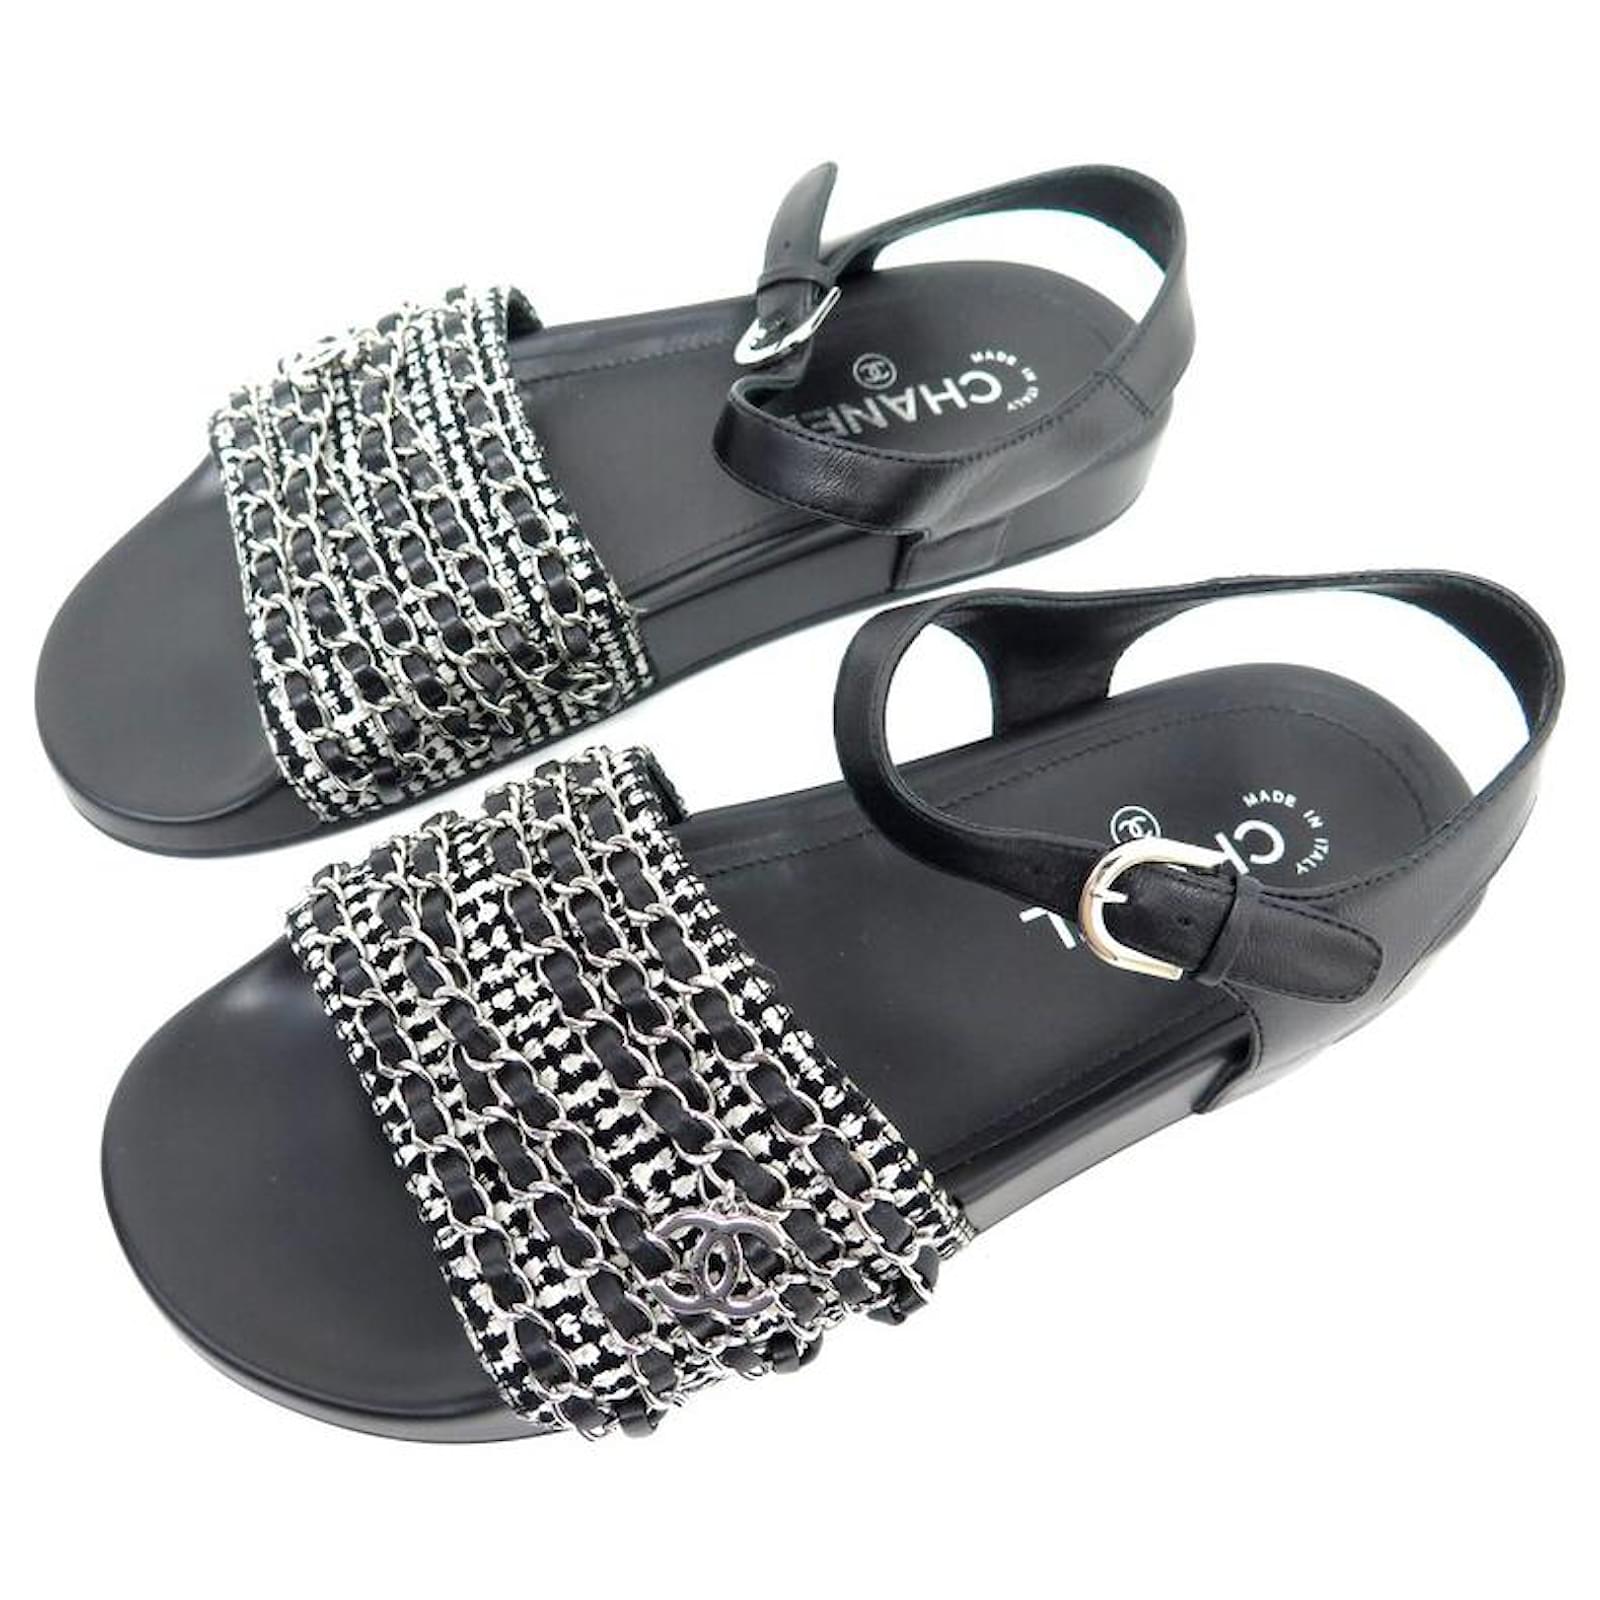 Sandals Chanel Chanel Tropiconic G SHOES33372 Sandals 40 Silver Leather Mules Shoes